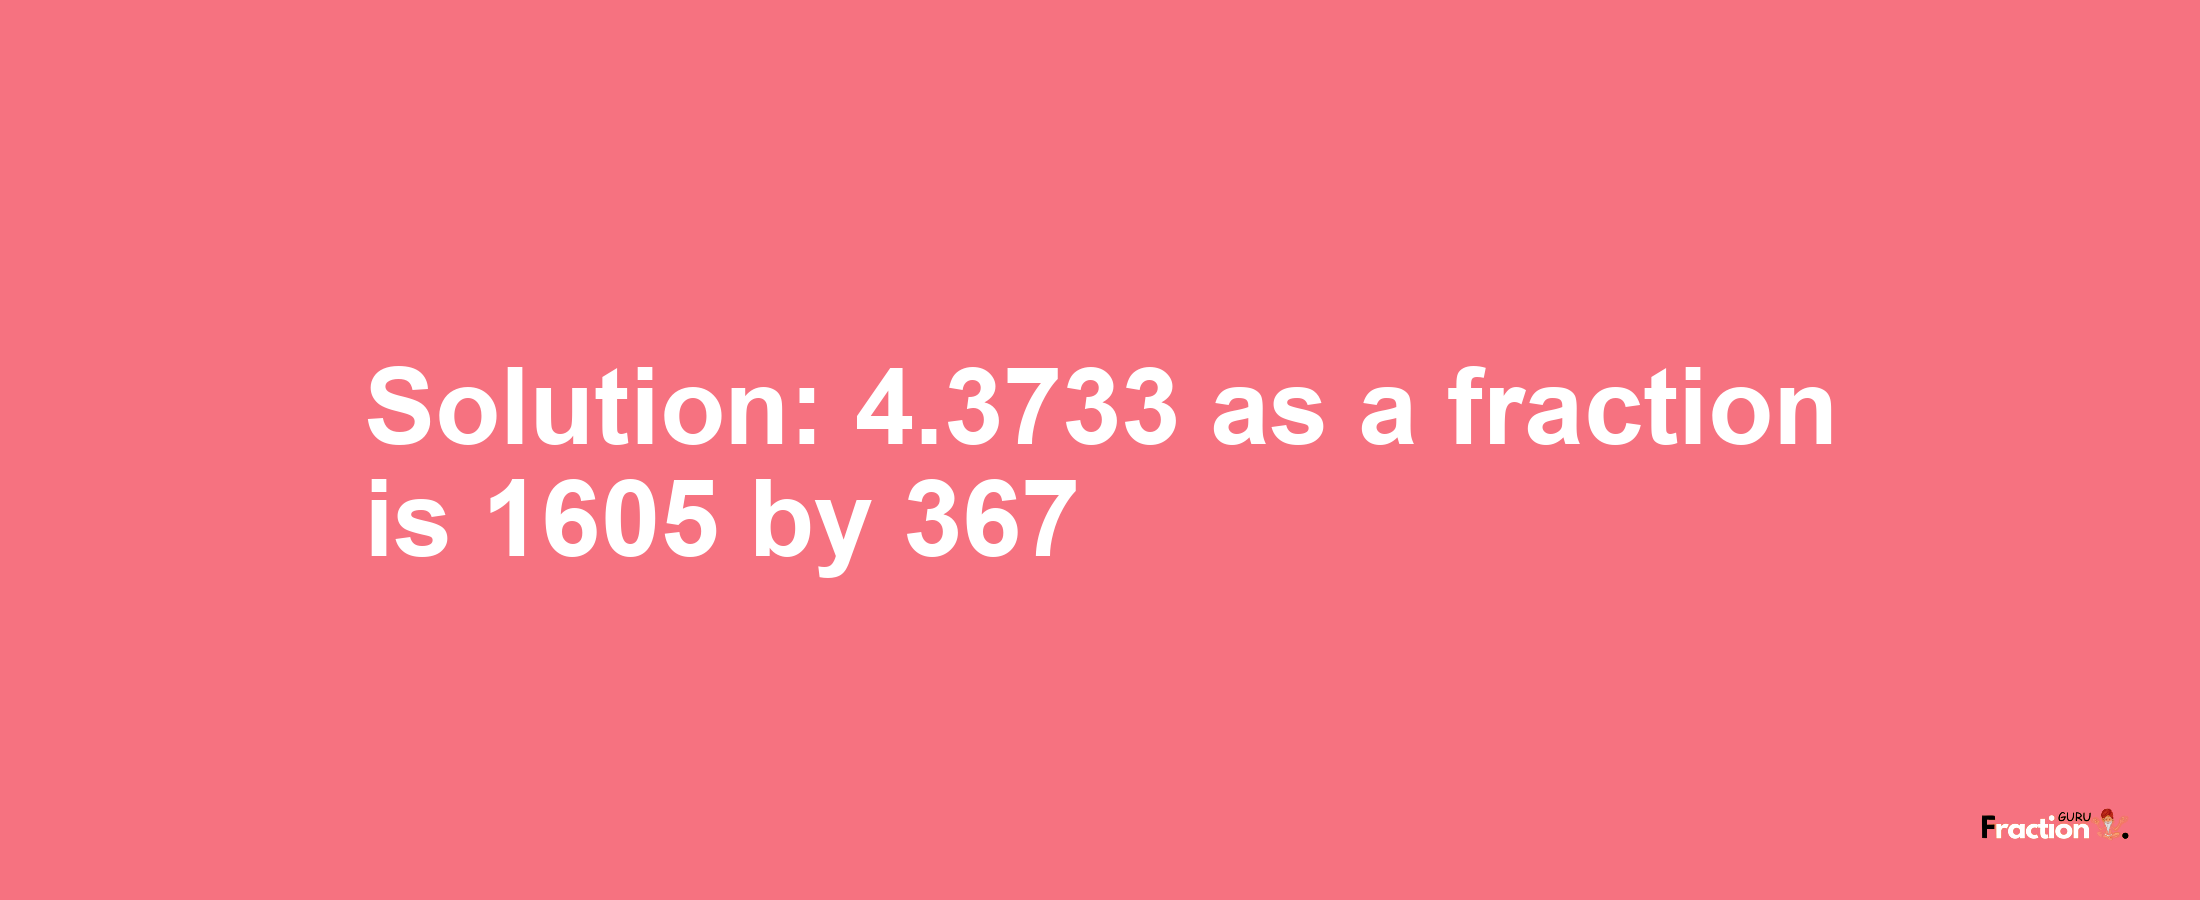 Solution:4.3733 as a fraction is 1605/367